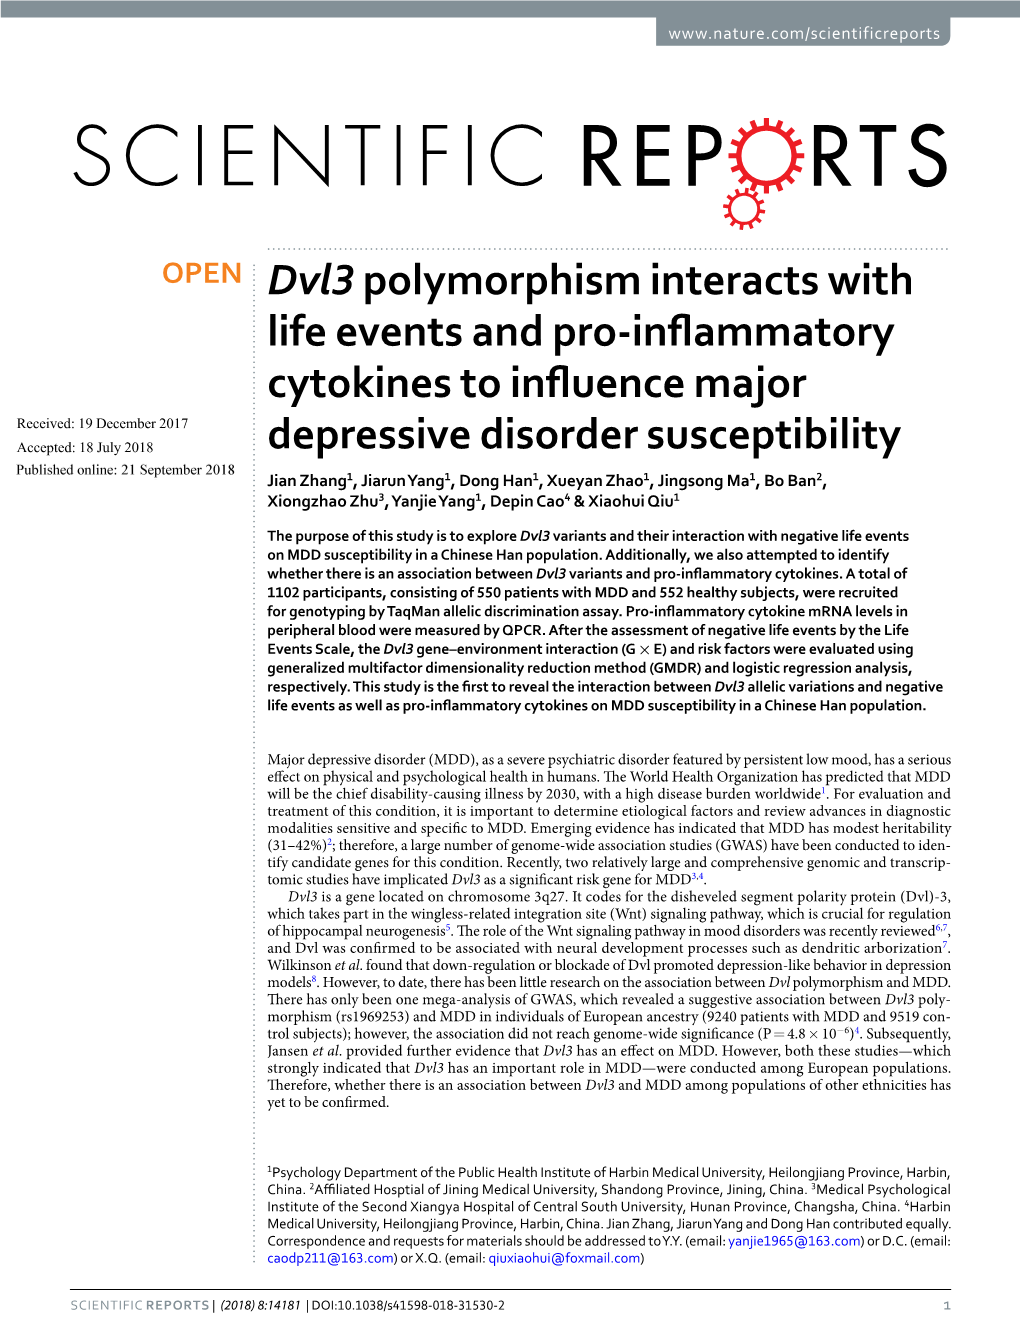 Dvl3 Polymorphism Interacts with Life Events and Pro-Inflammatory